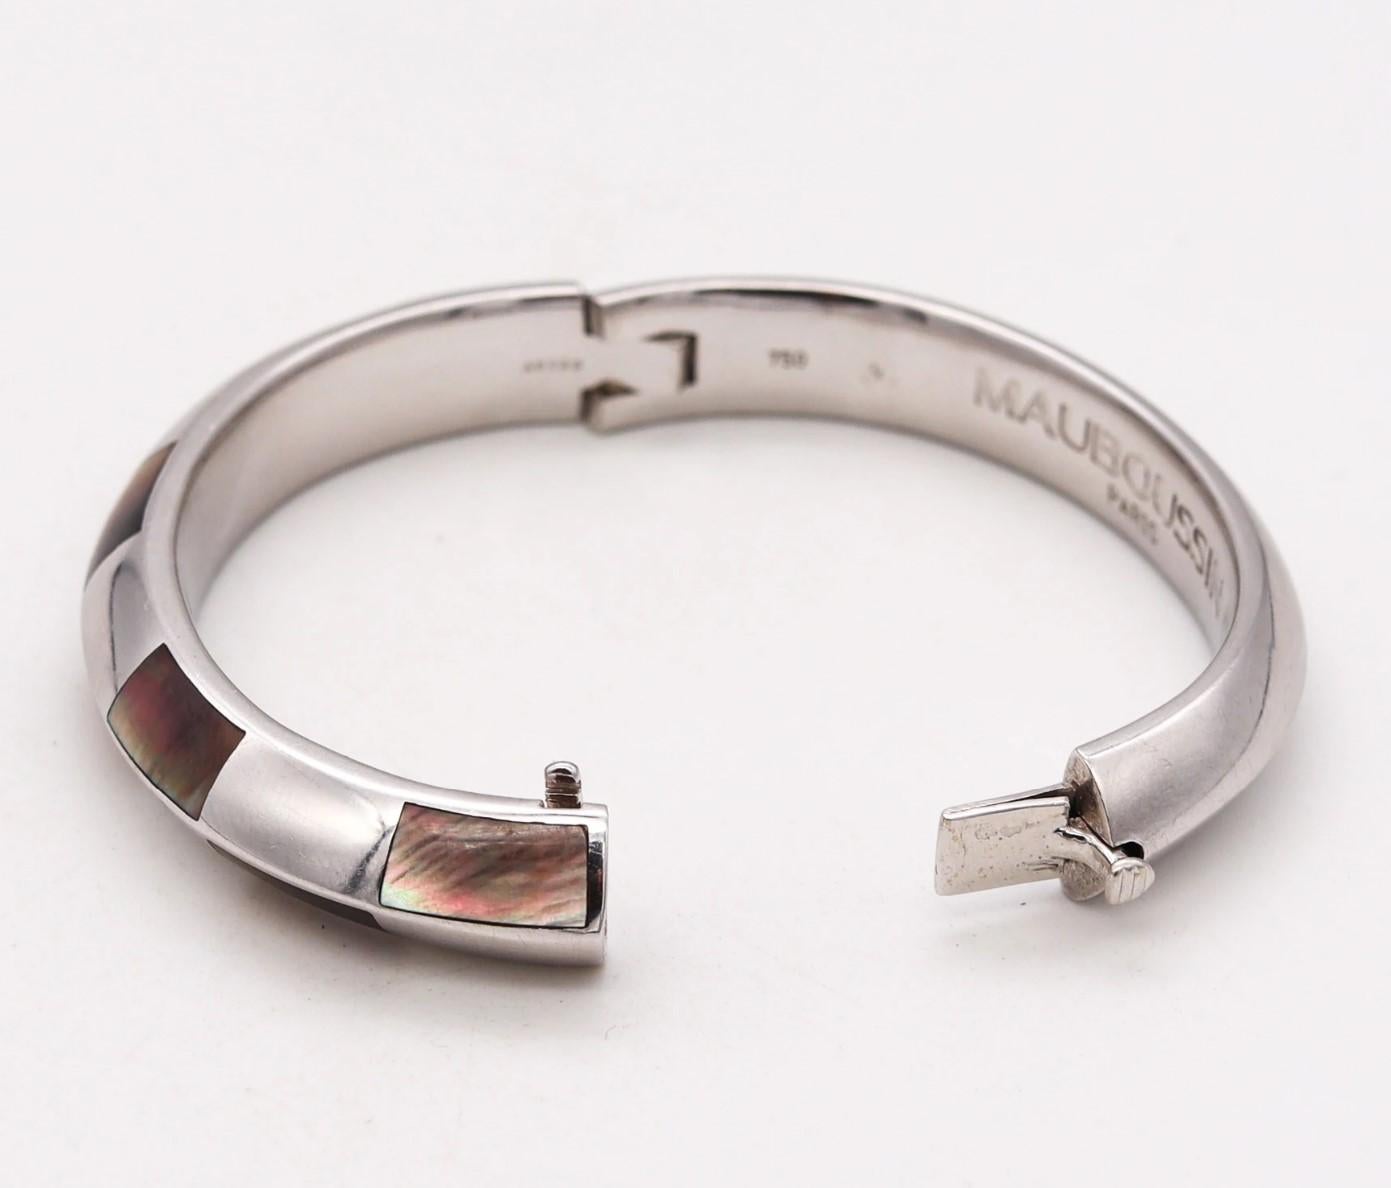 Mauboussin Paris Geometric Bangle Bracelet in 18Kt White Gold with Carved Nacre For Sale 1